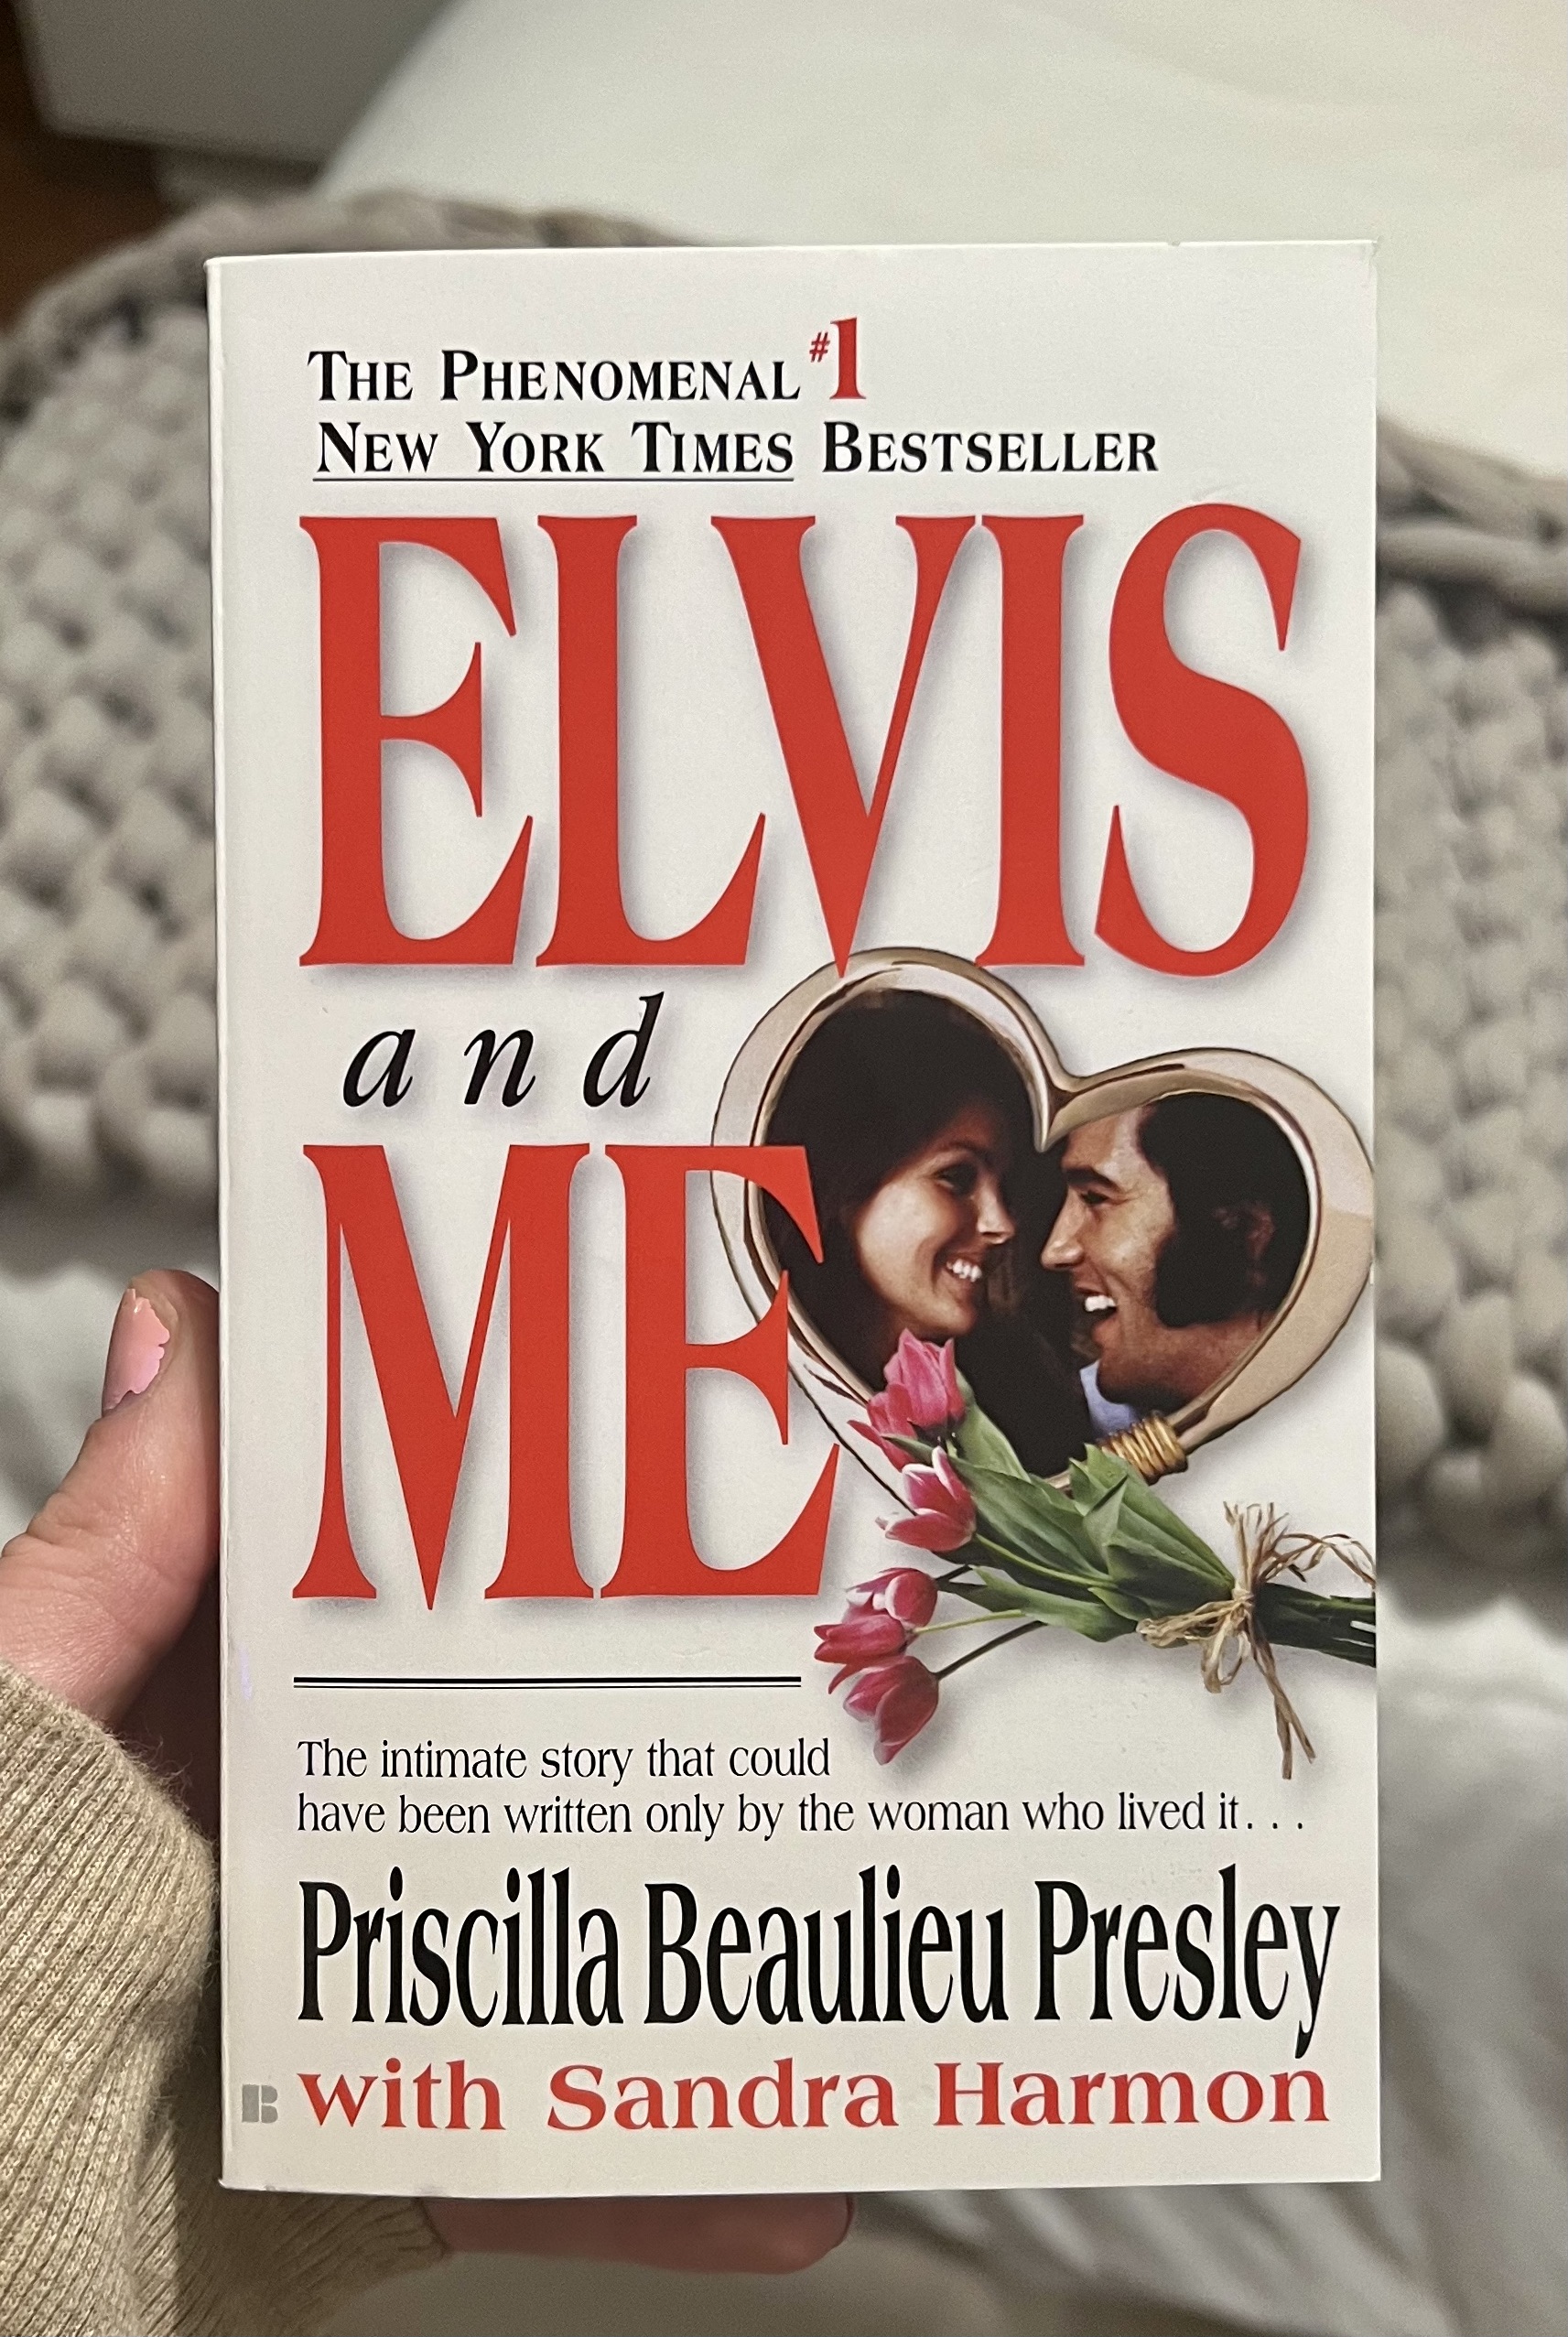 Elvis and Me, is a New York Times Bestseller and a favorite of many.